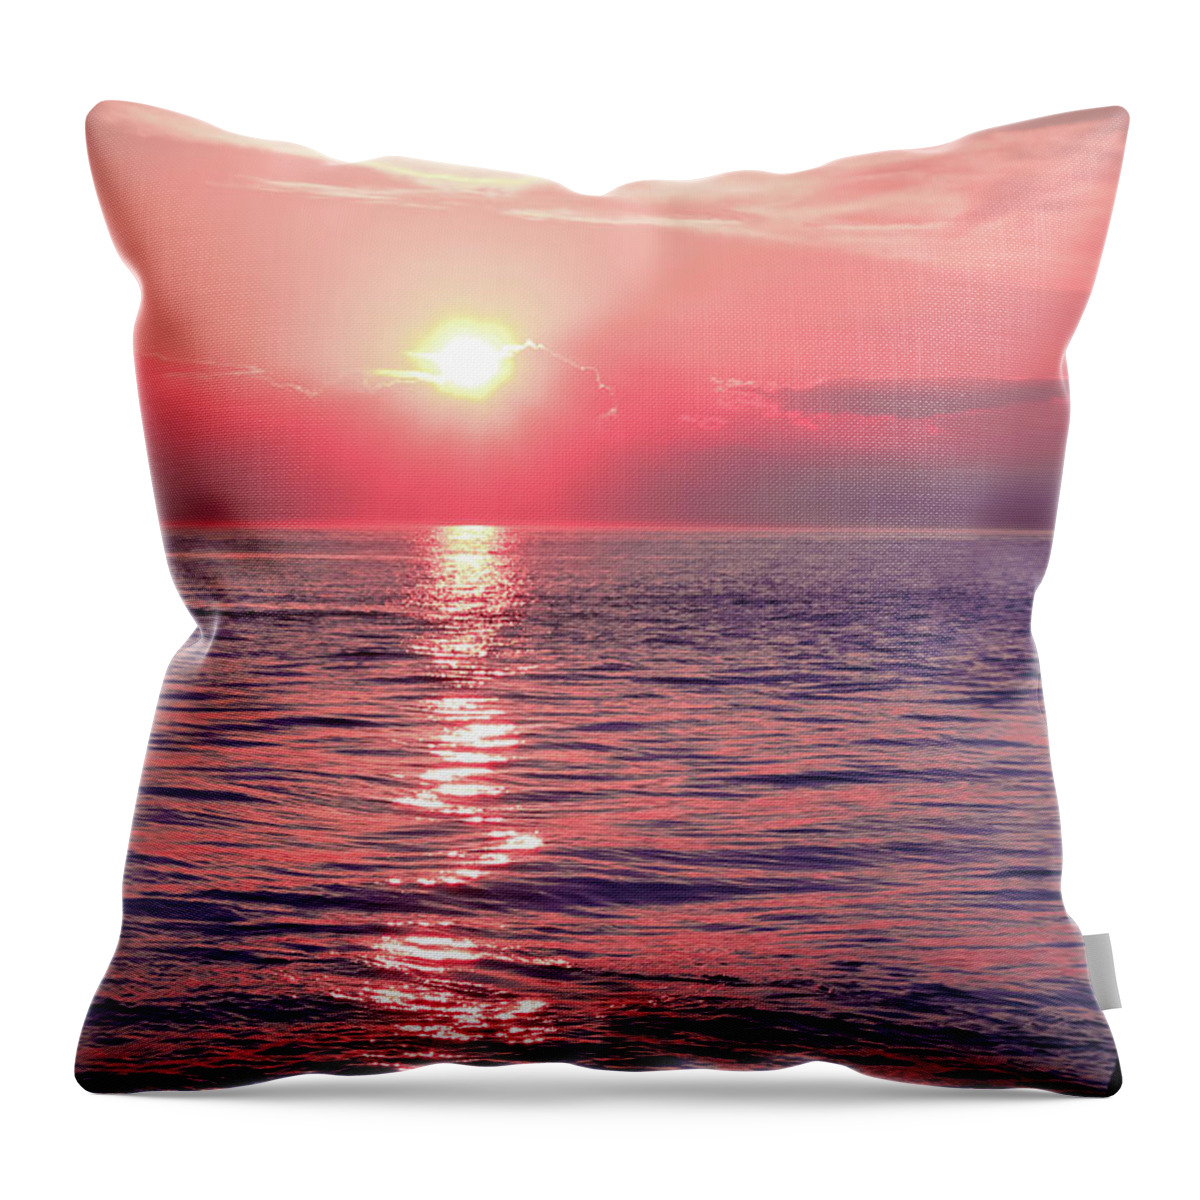 Pink Sunset Throw Pillow featuring the photograph Pink Sunset by Colleen Kammerer